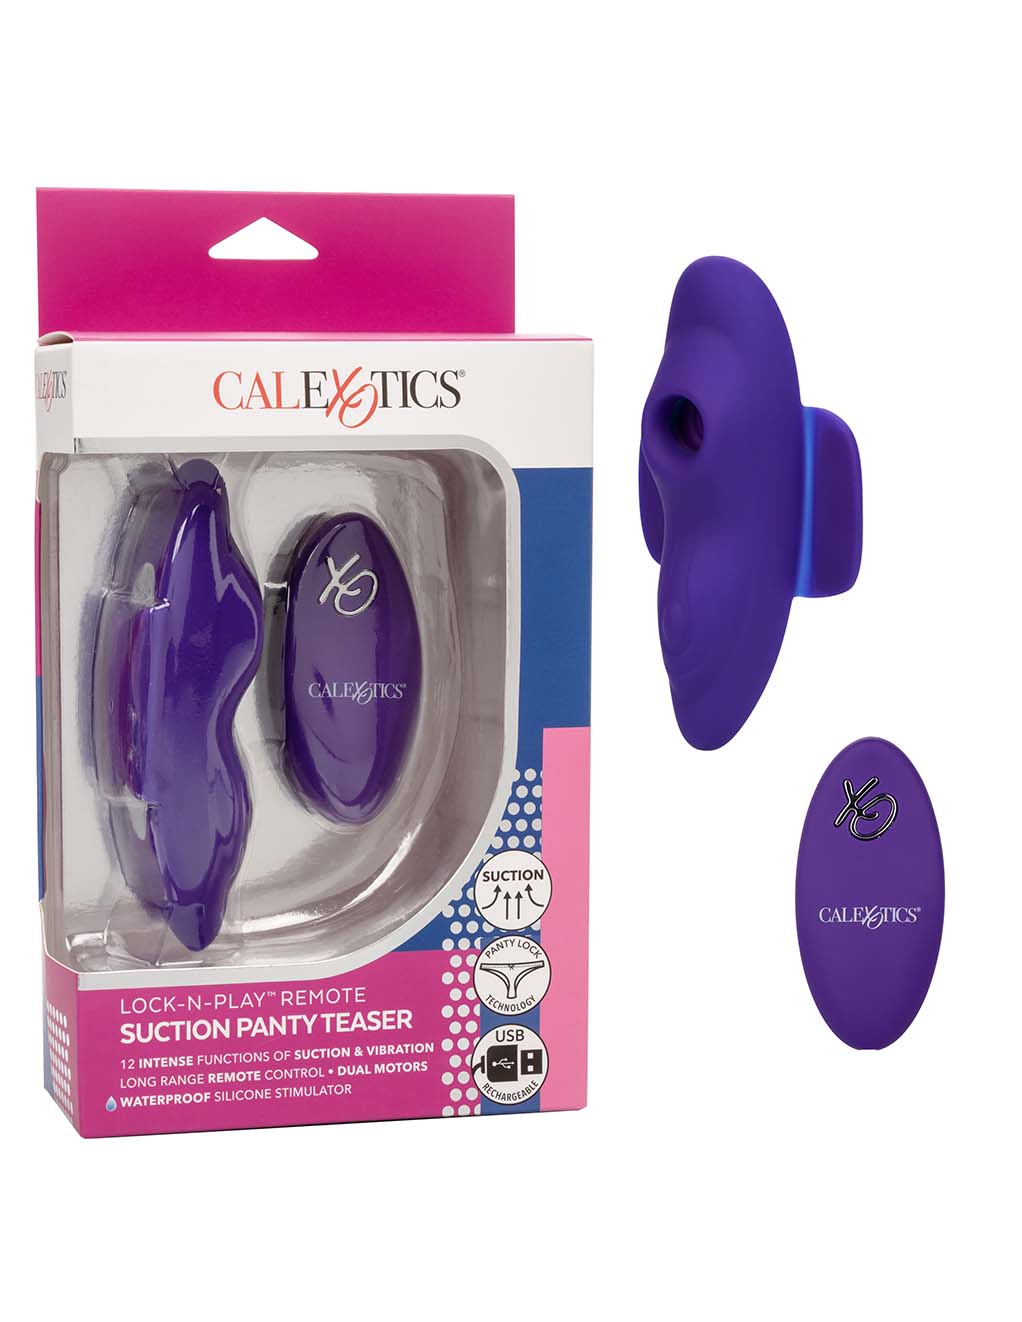 CalExotics Suction Panty Teaser- with Box